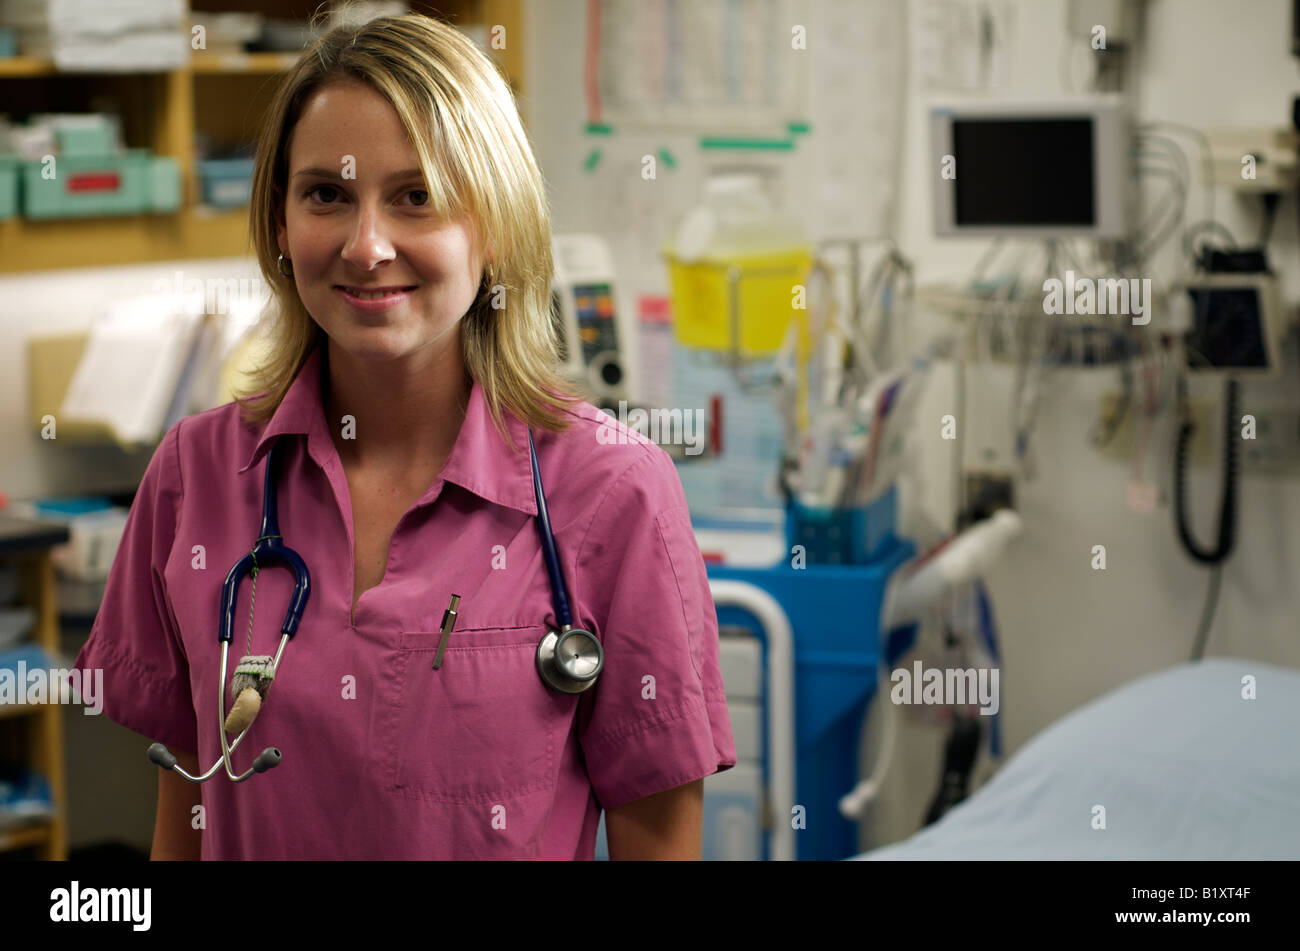 Female nurse in scrubs in a hospital setting smiling and posing with stethoscope. Half body pose. Stock Photo